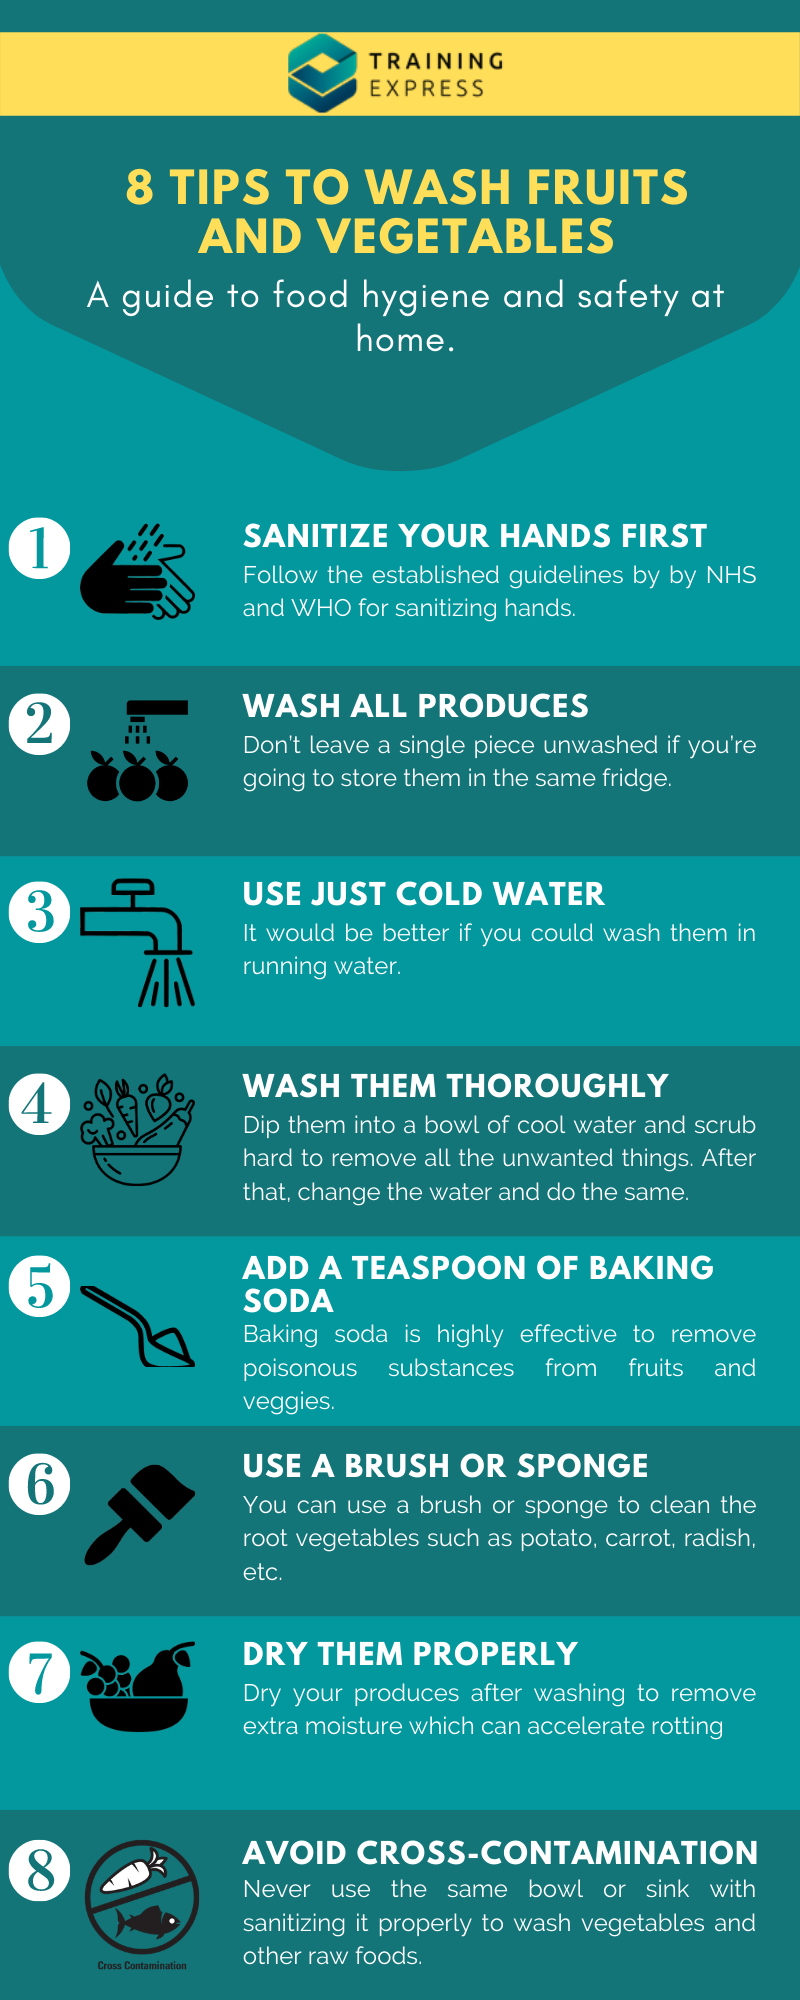 8 Tips to Wash Fruits and Vegetables